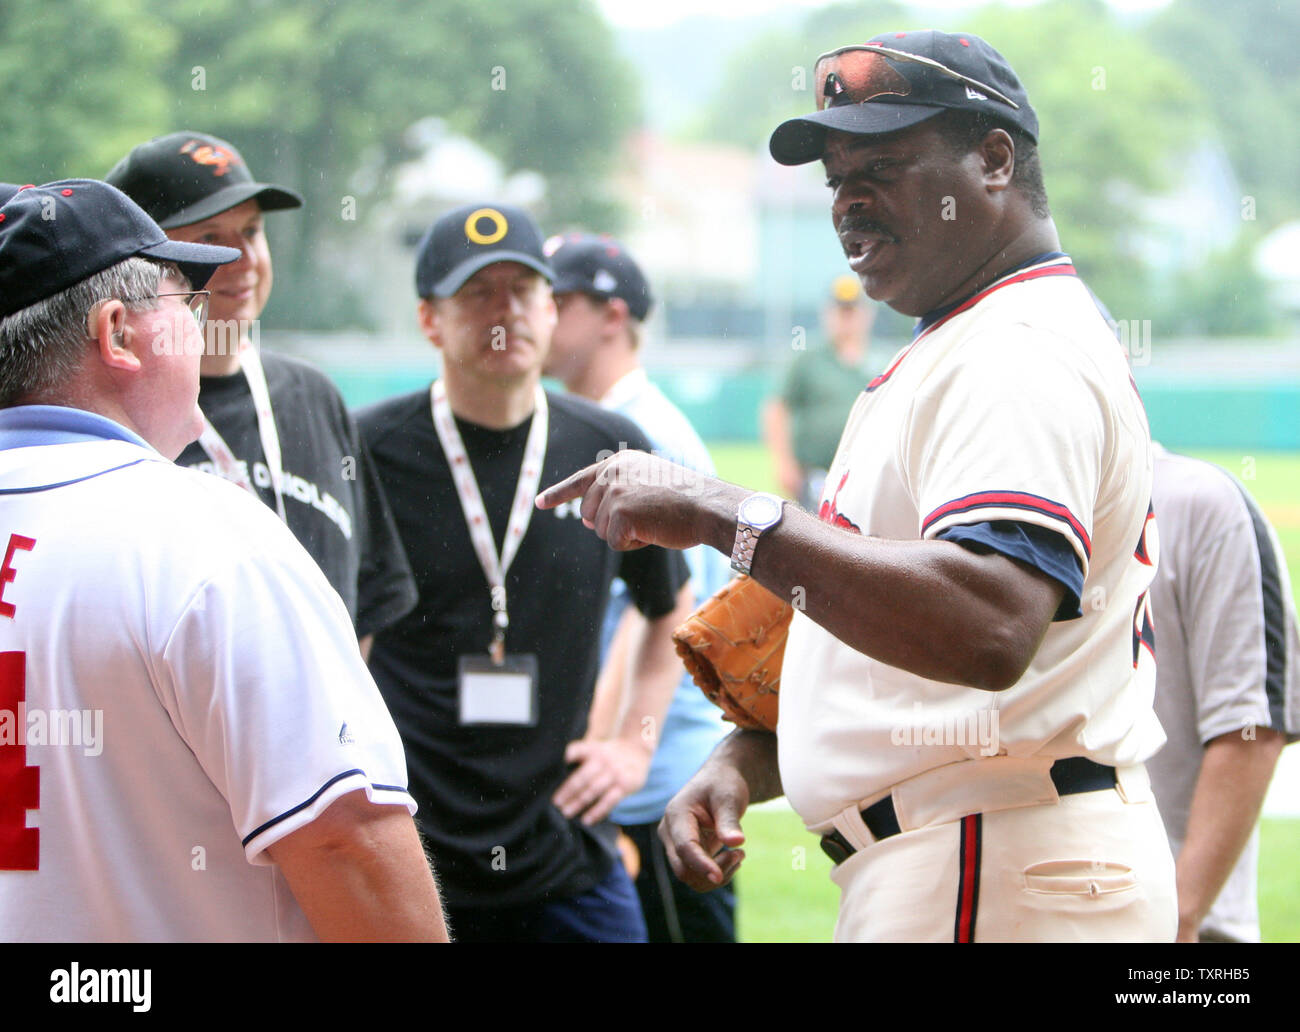 Member of the National Baseball Hall of Fame Eddie Murray, gives